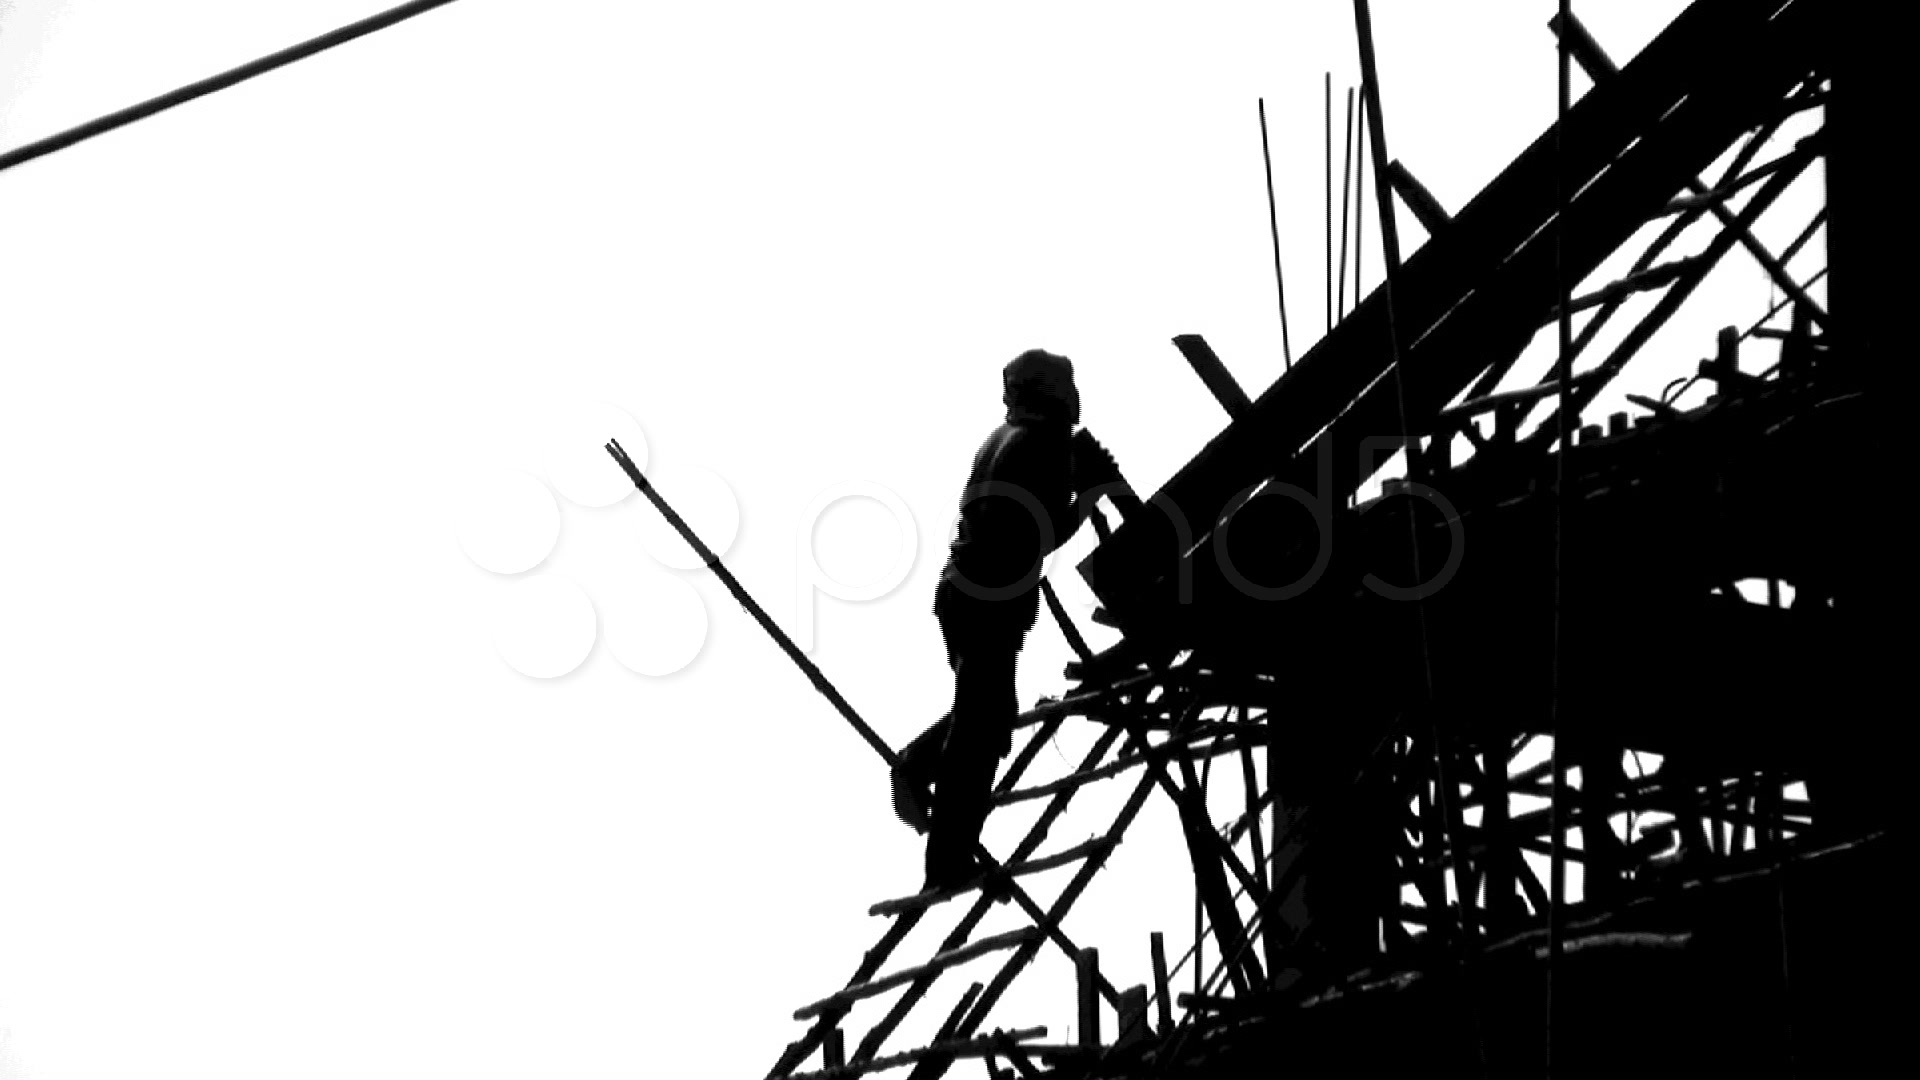 Video: CONSTRUCTION WORKER SILHOUETTE Industry Site Building ...